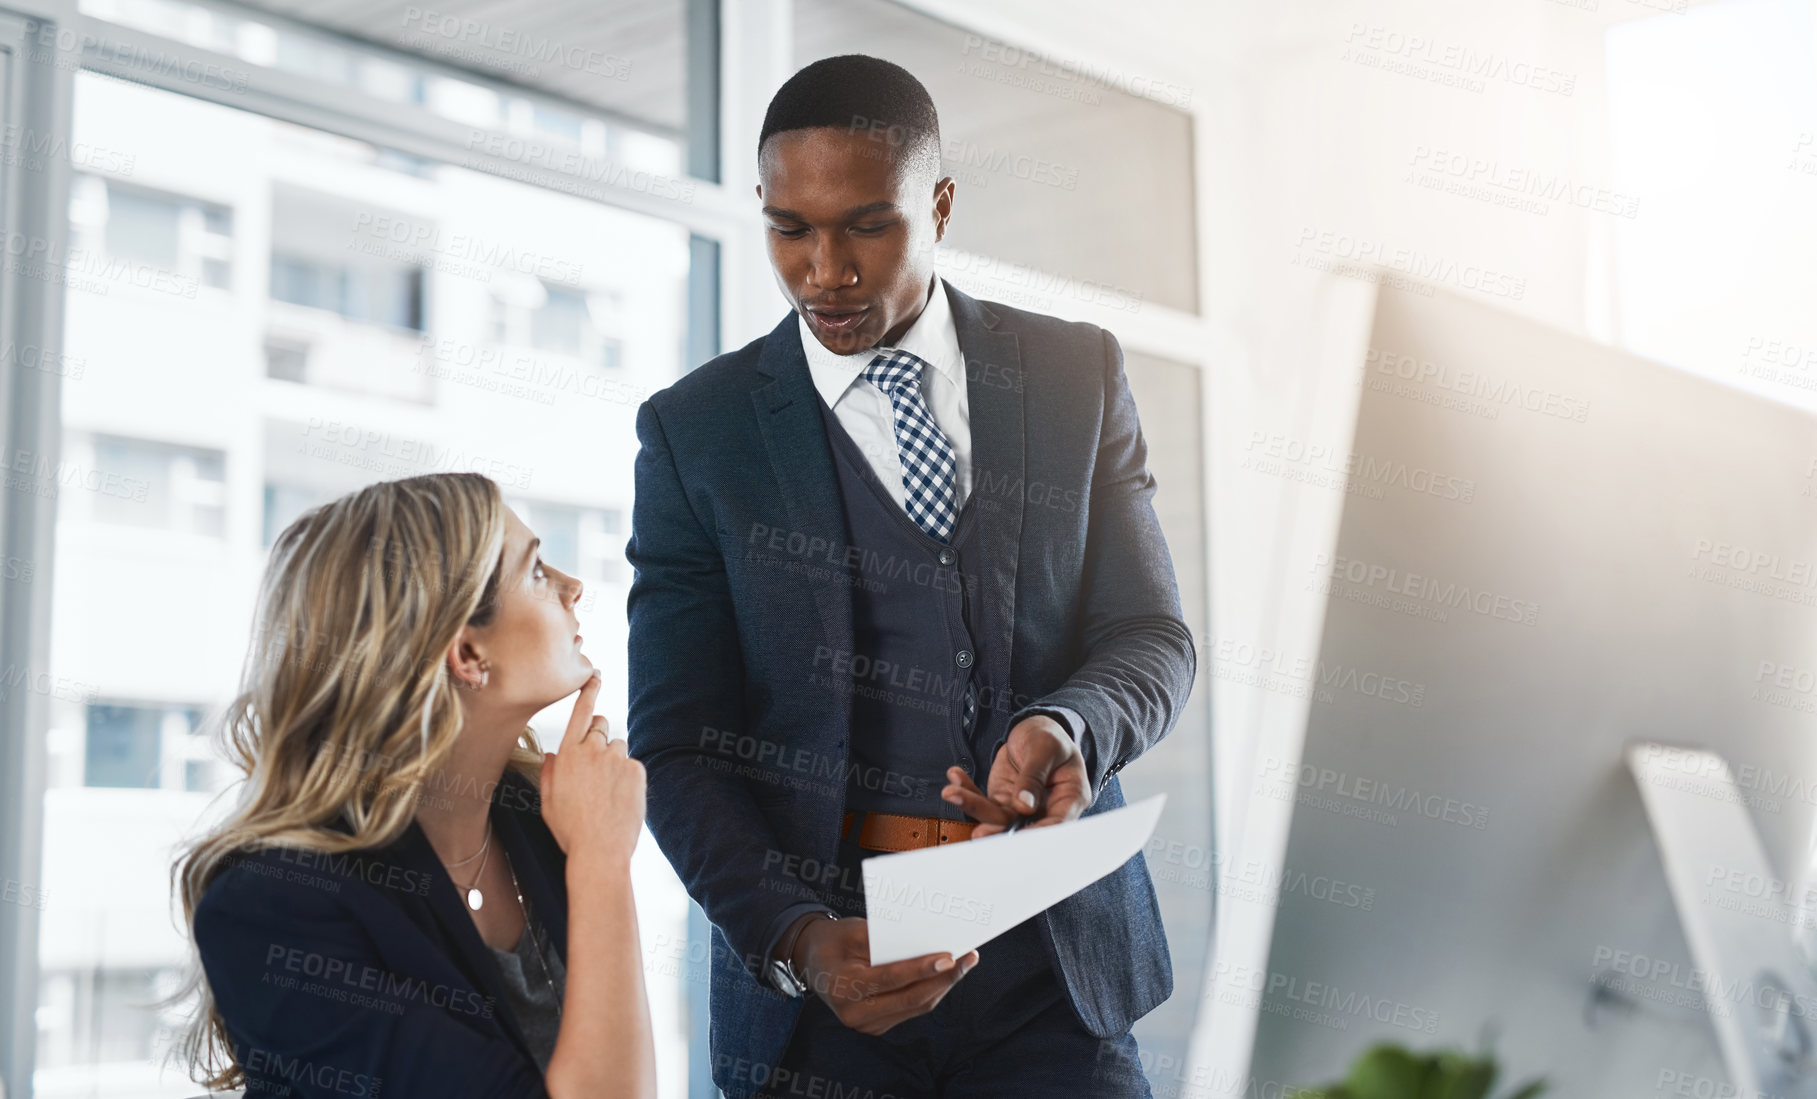 Buy stock photo Shot of two businesspeople working together in an office